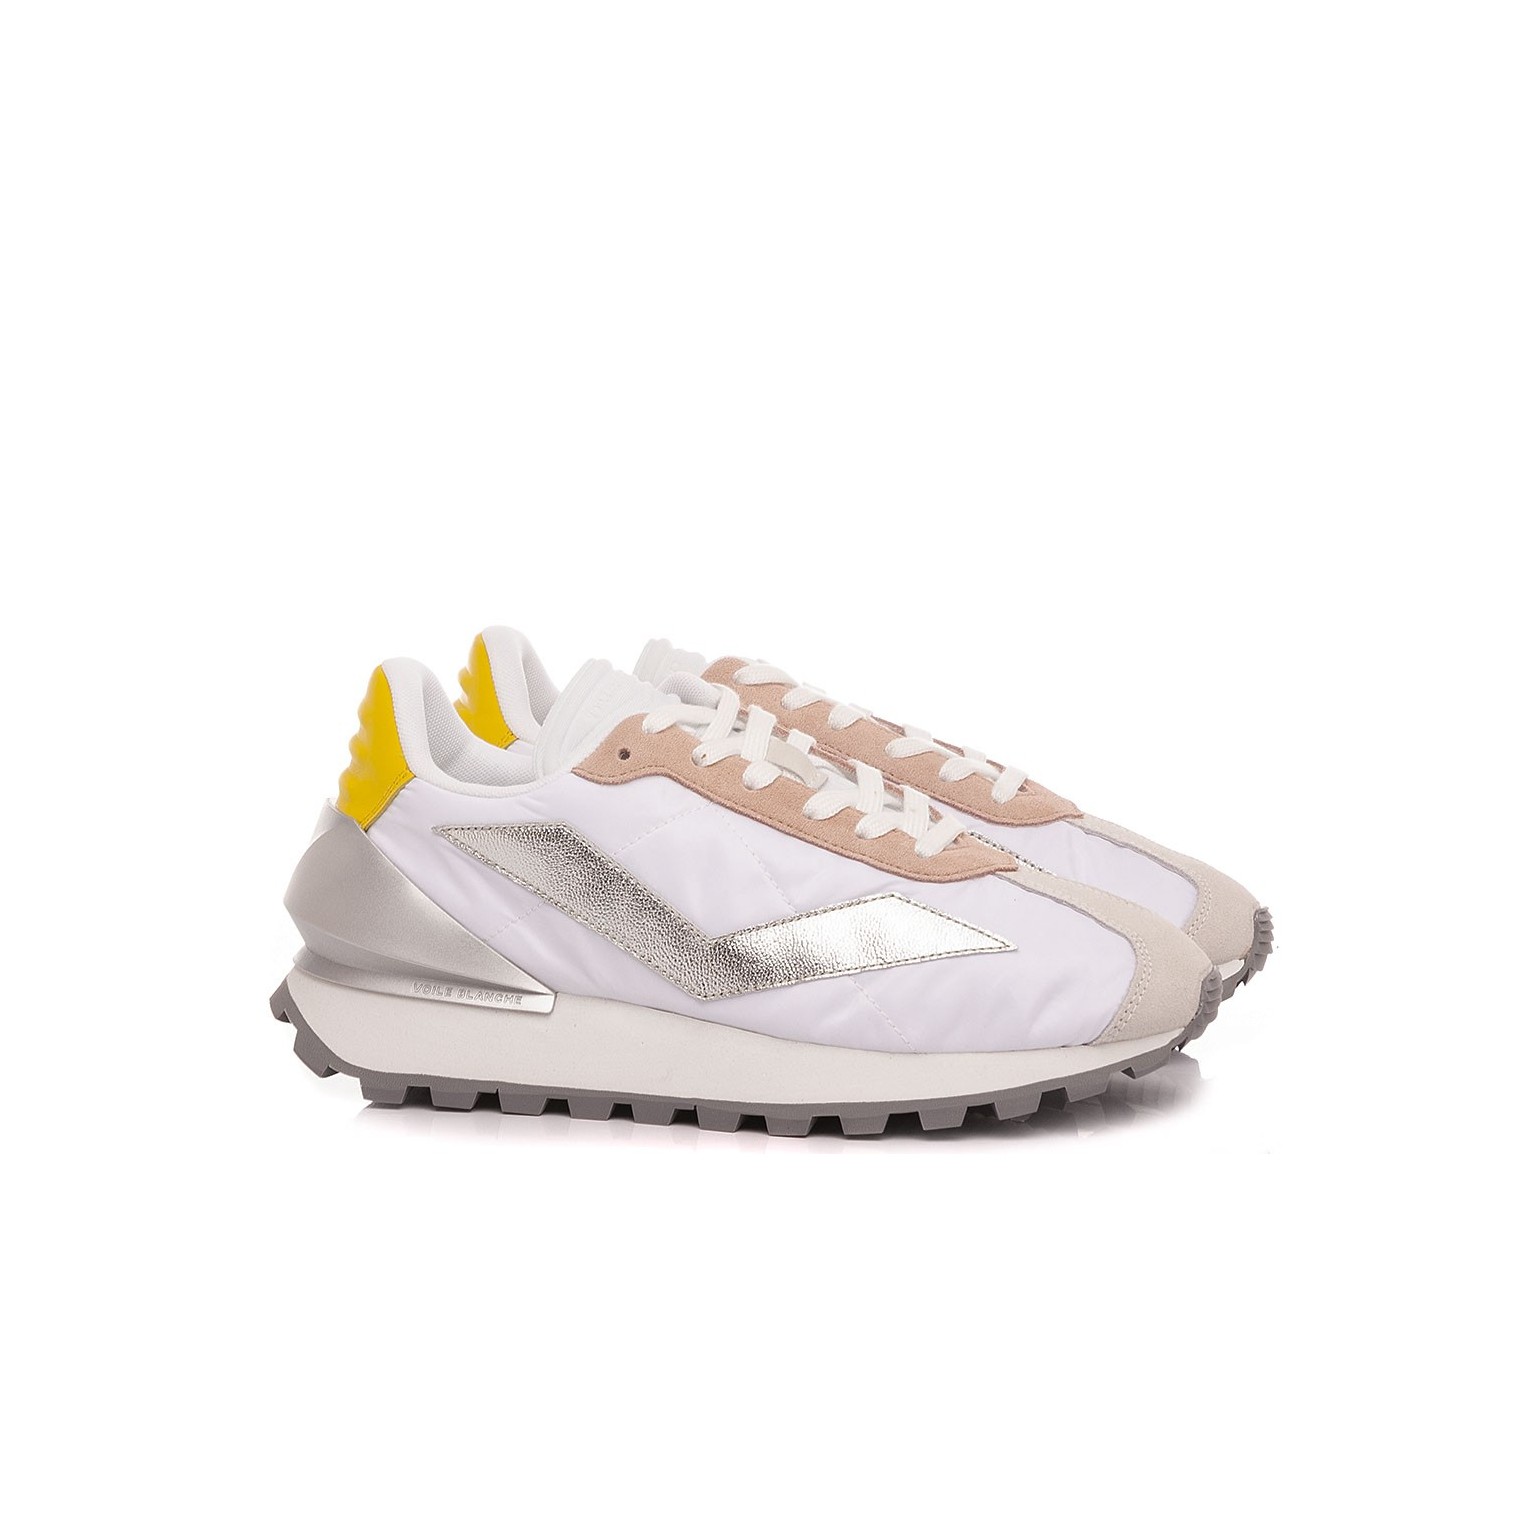 Perioperativ periode Adelaide Ingen måde Voile Blanche Women's Sneakers Qwark Spur White-Silver